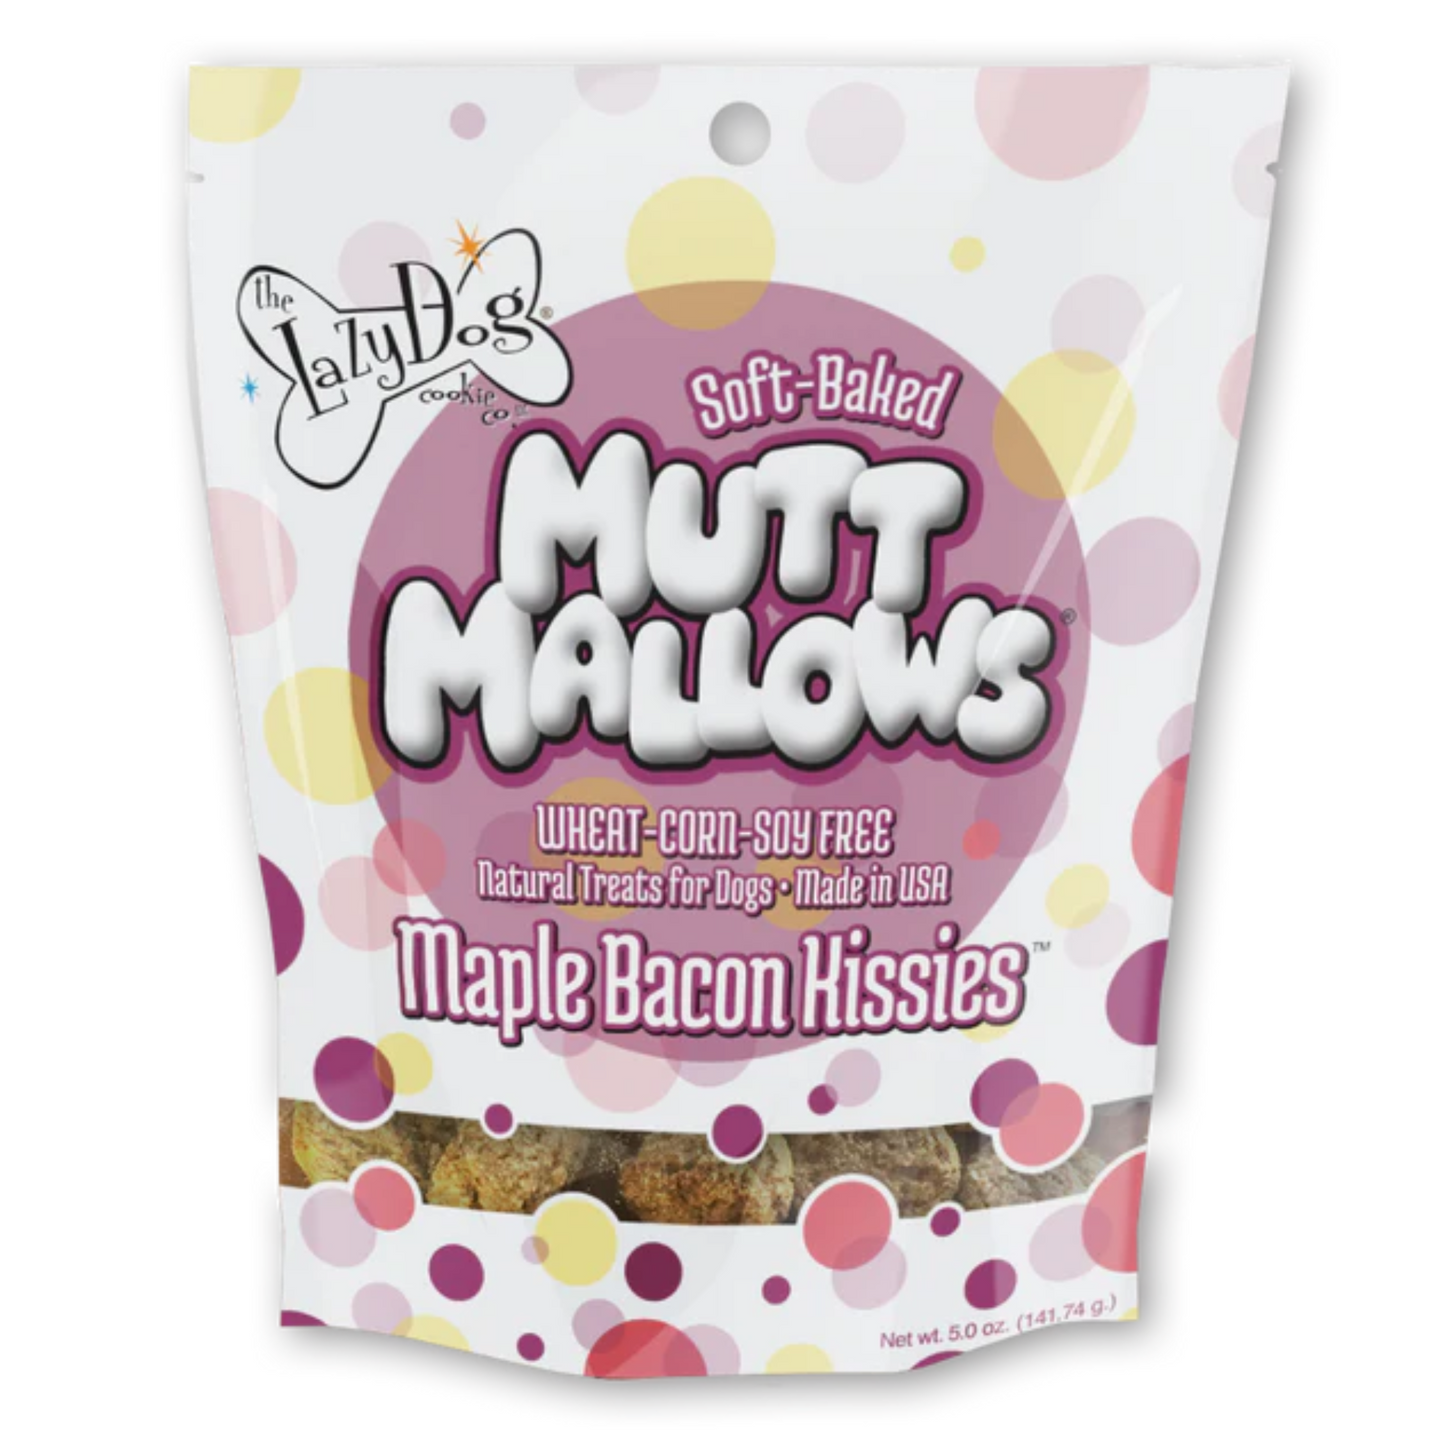 The Lazy Dog Cookie Co. Mutt Mallows Maple Bacon Kisses, 5 oz.